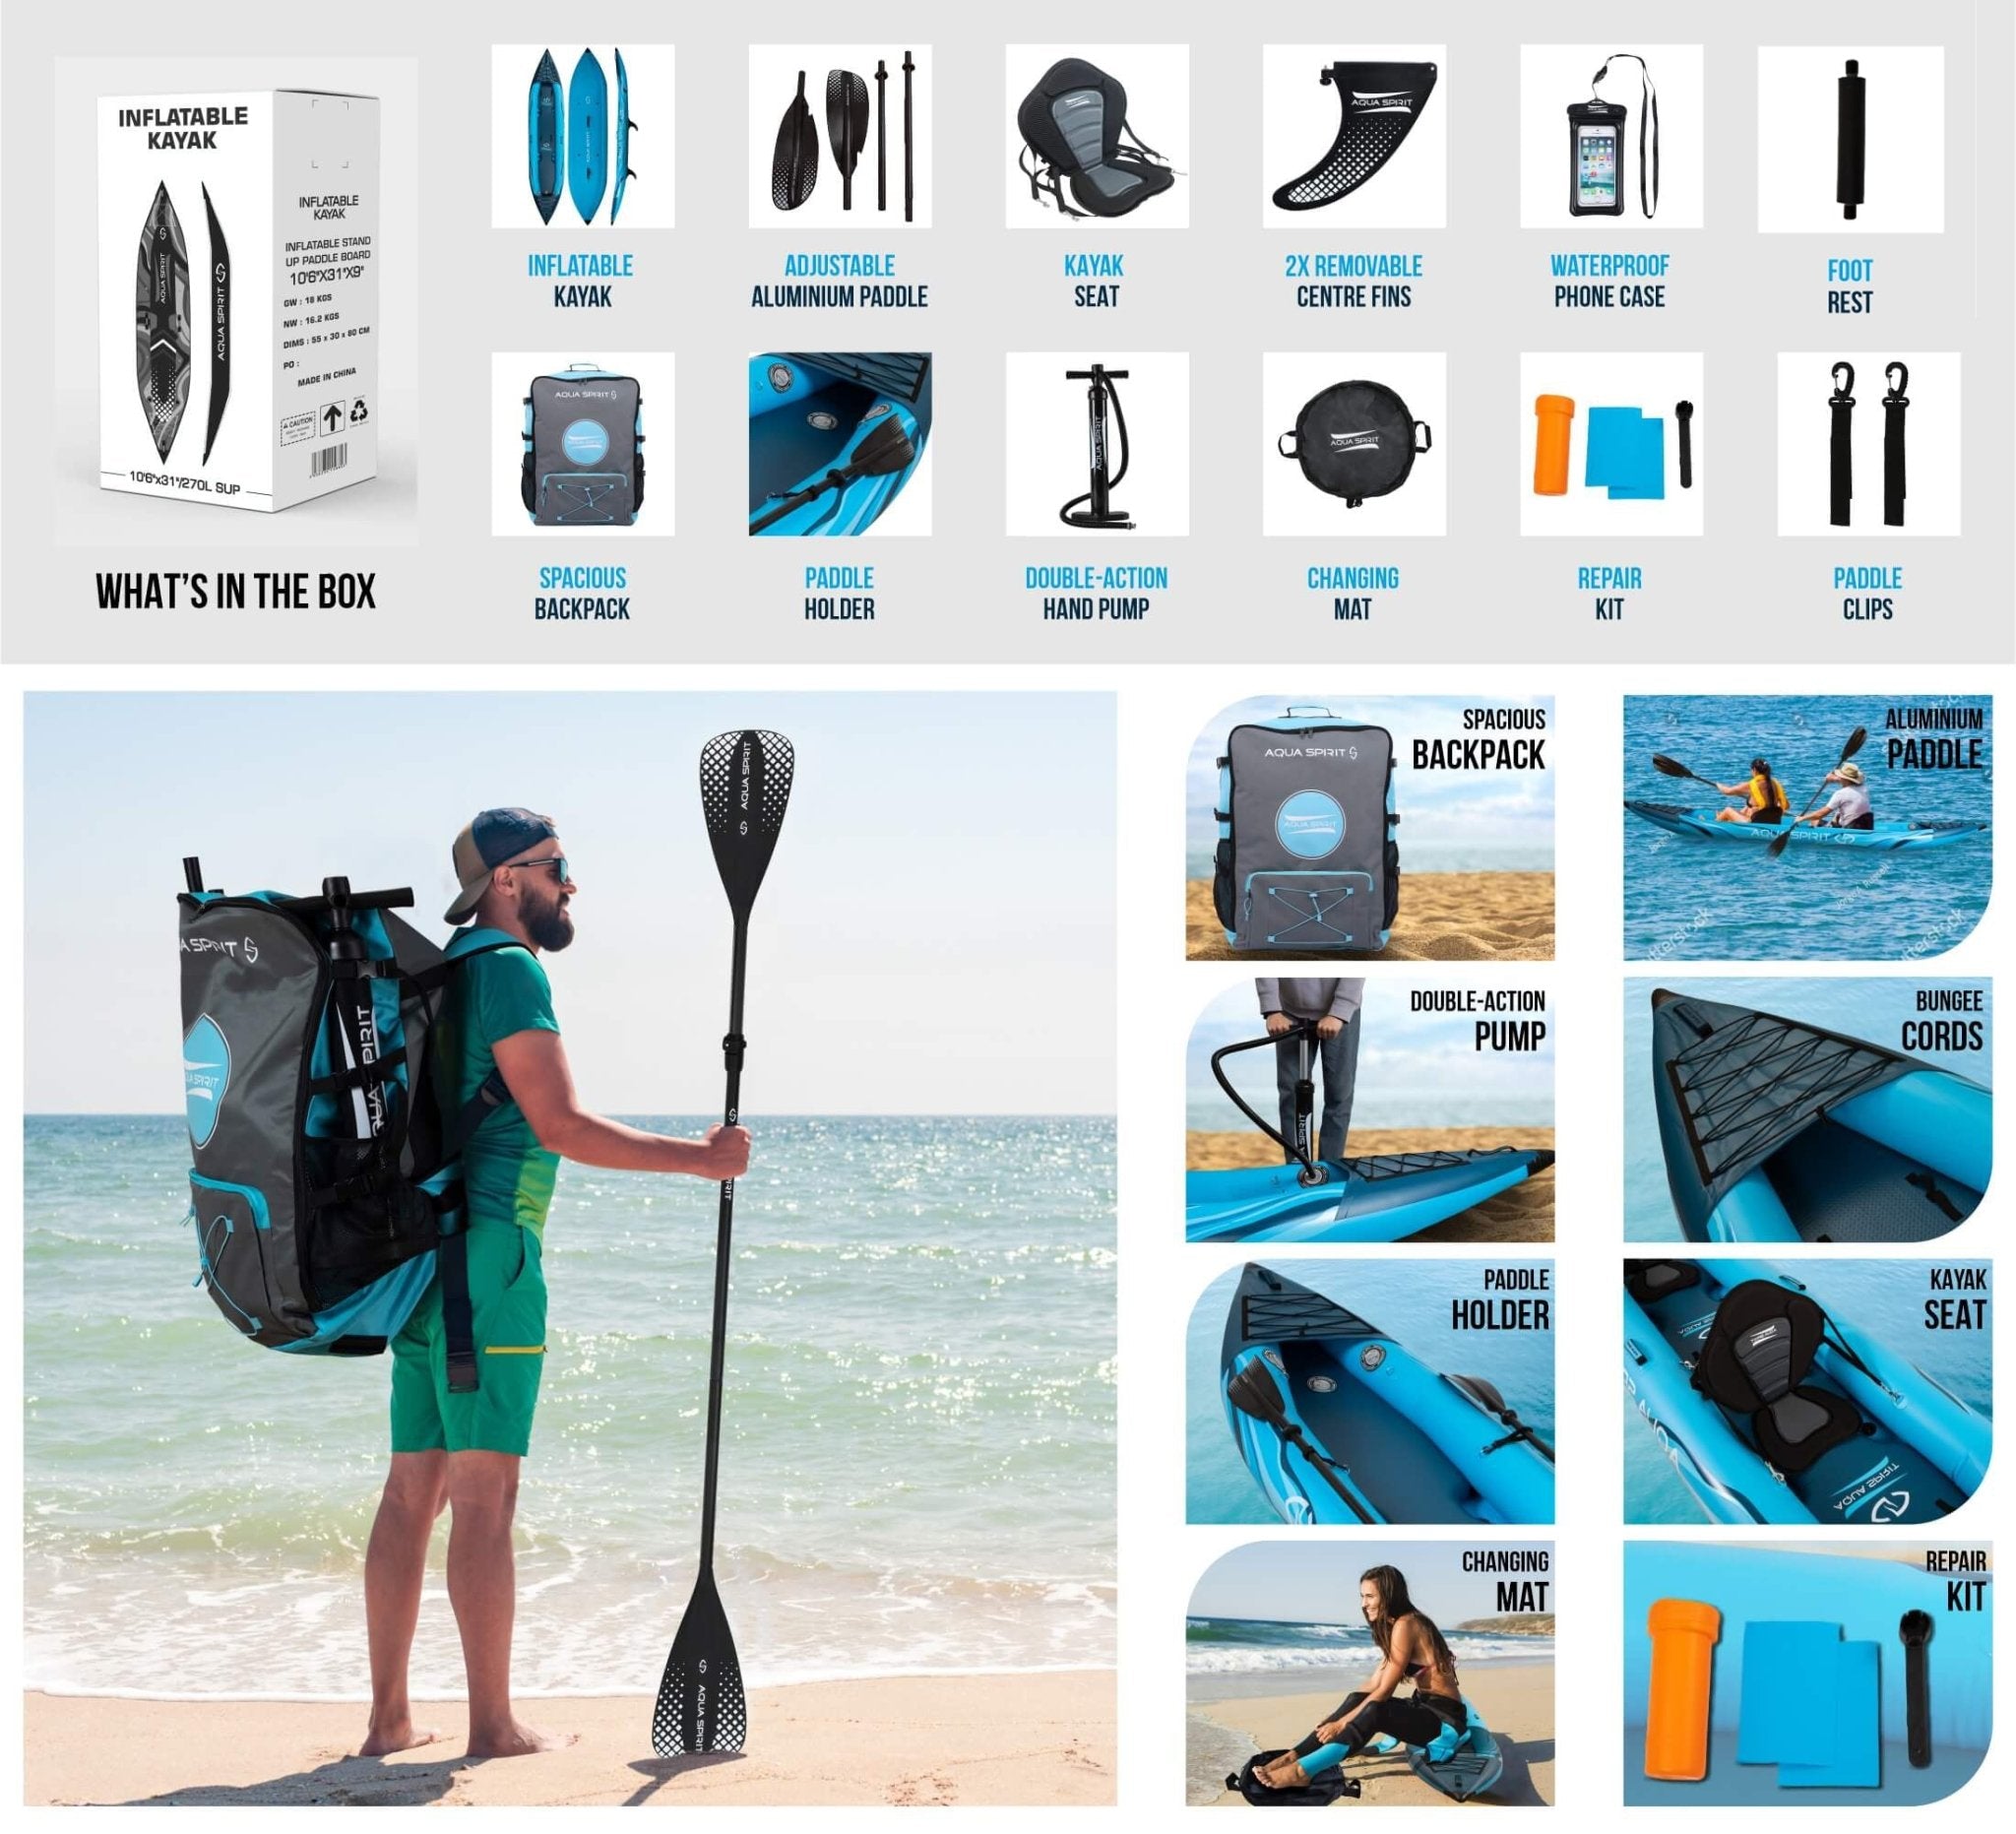 Aqua Spirit Inflatable Kayak Latest 2023 Model, 10'5”/13’5”/1 or 2 Person Complete Kayak Kit with Paddle, Backpack, Double-Action Pump and more accessories/Adult Beginners/Experts - 3 Year Warranty - Aqua Spirit iSUPs UK